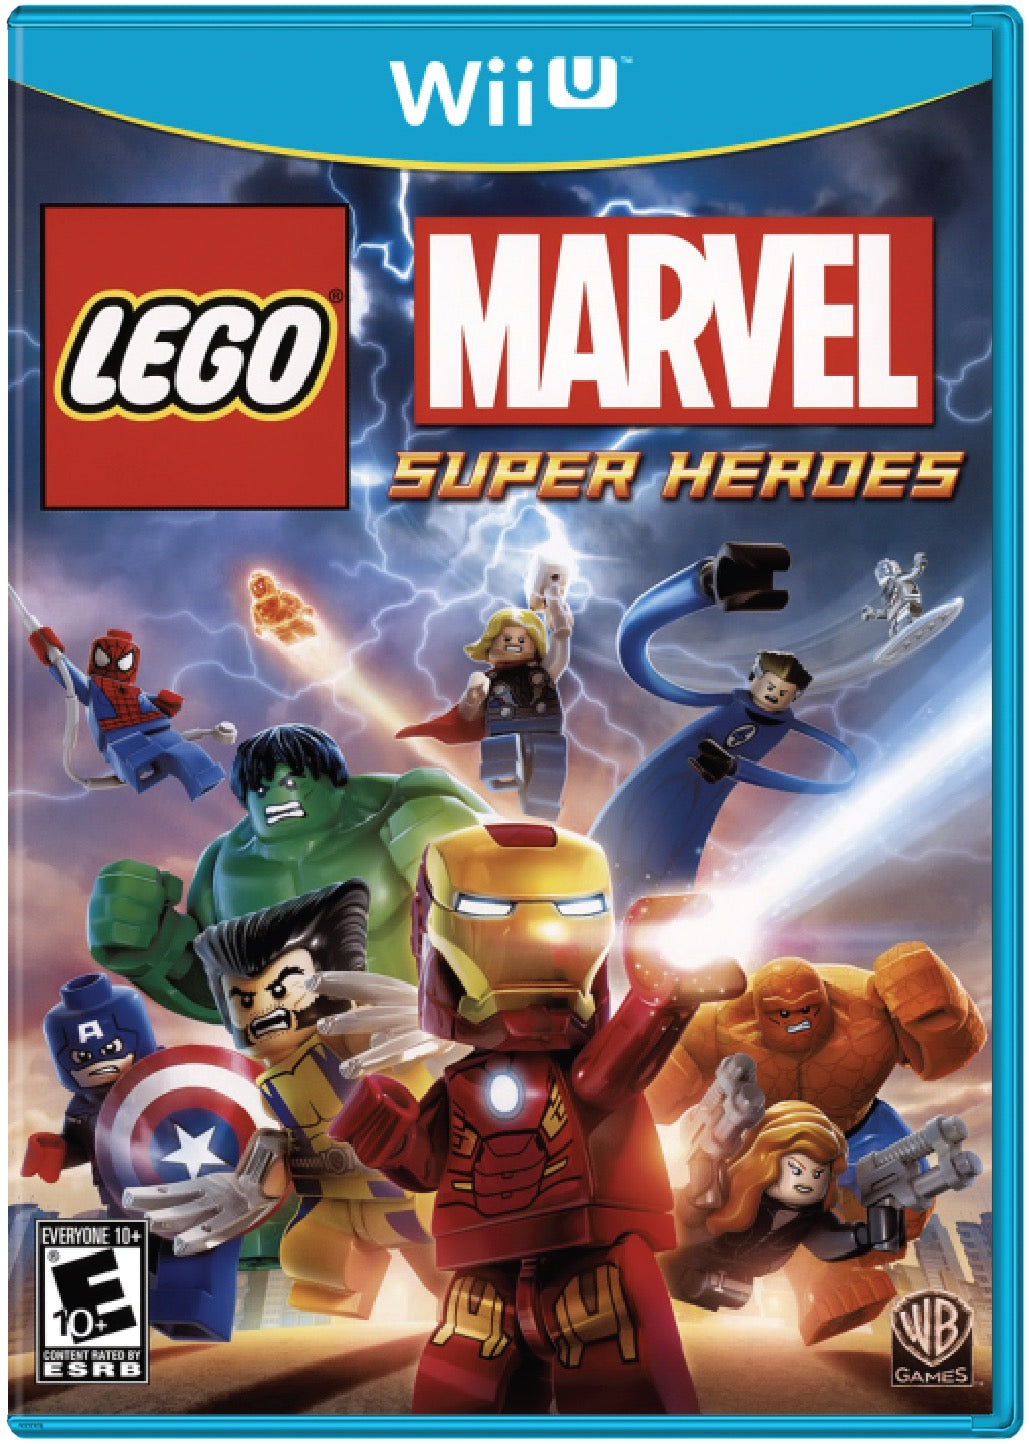 LEGO Marvel Super Heroes Cover Art and Product Photo